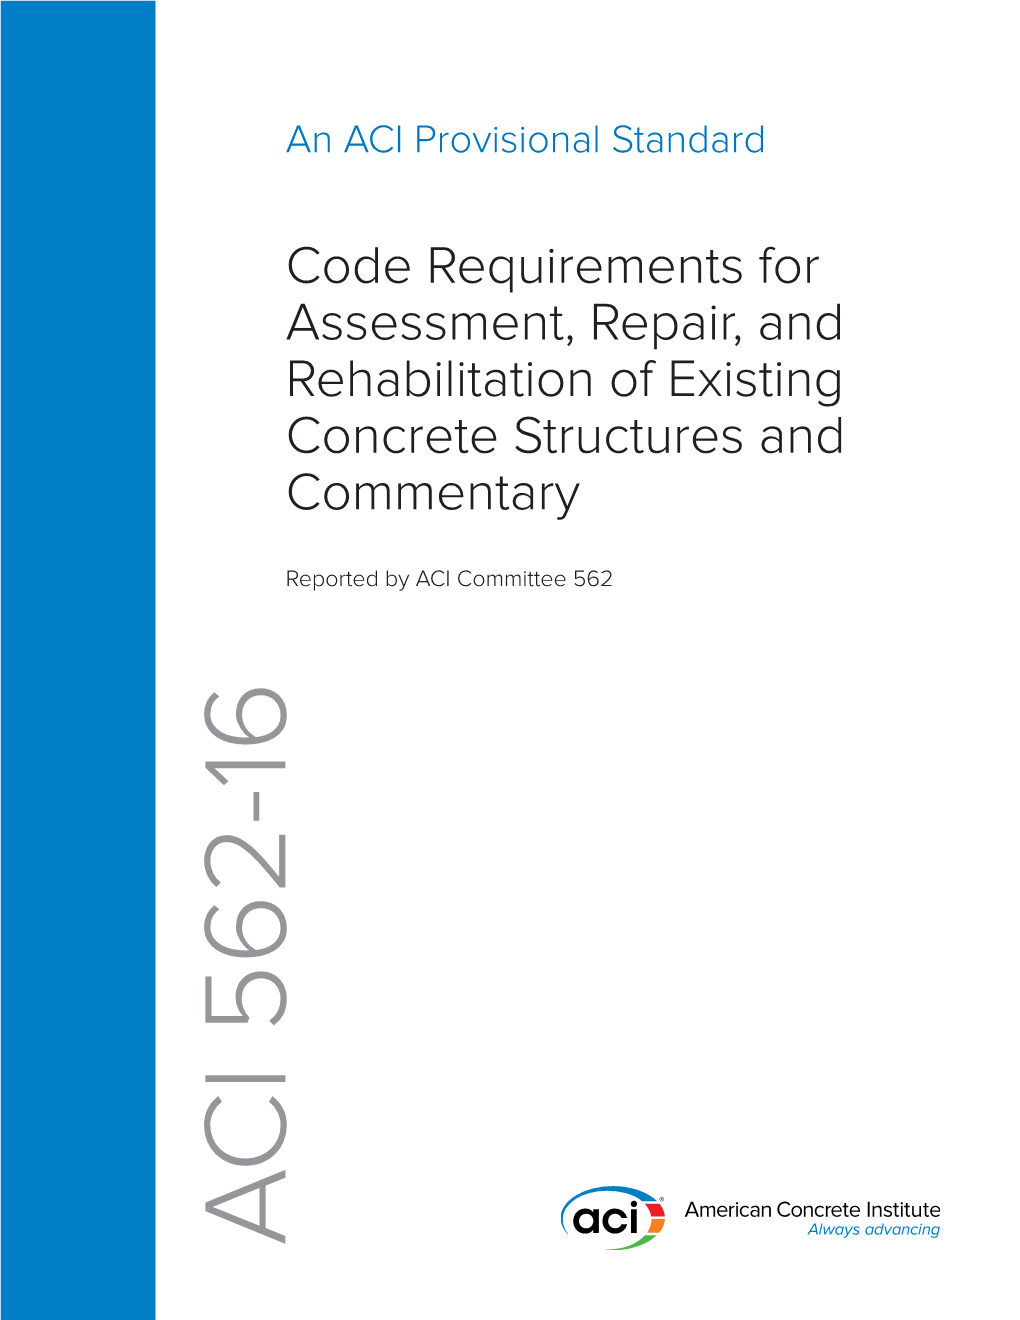 Code Requirements for Assessment, Repair, and Rehabilitation of Existing Concrete Structures and Commentary